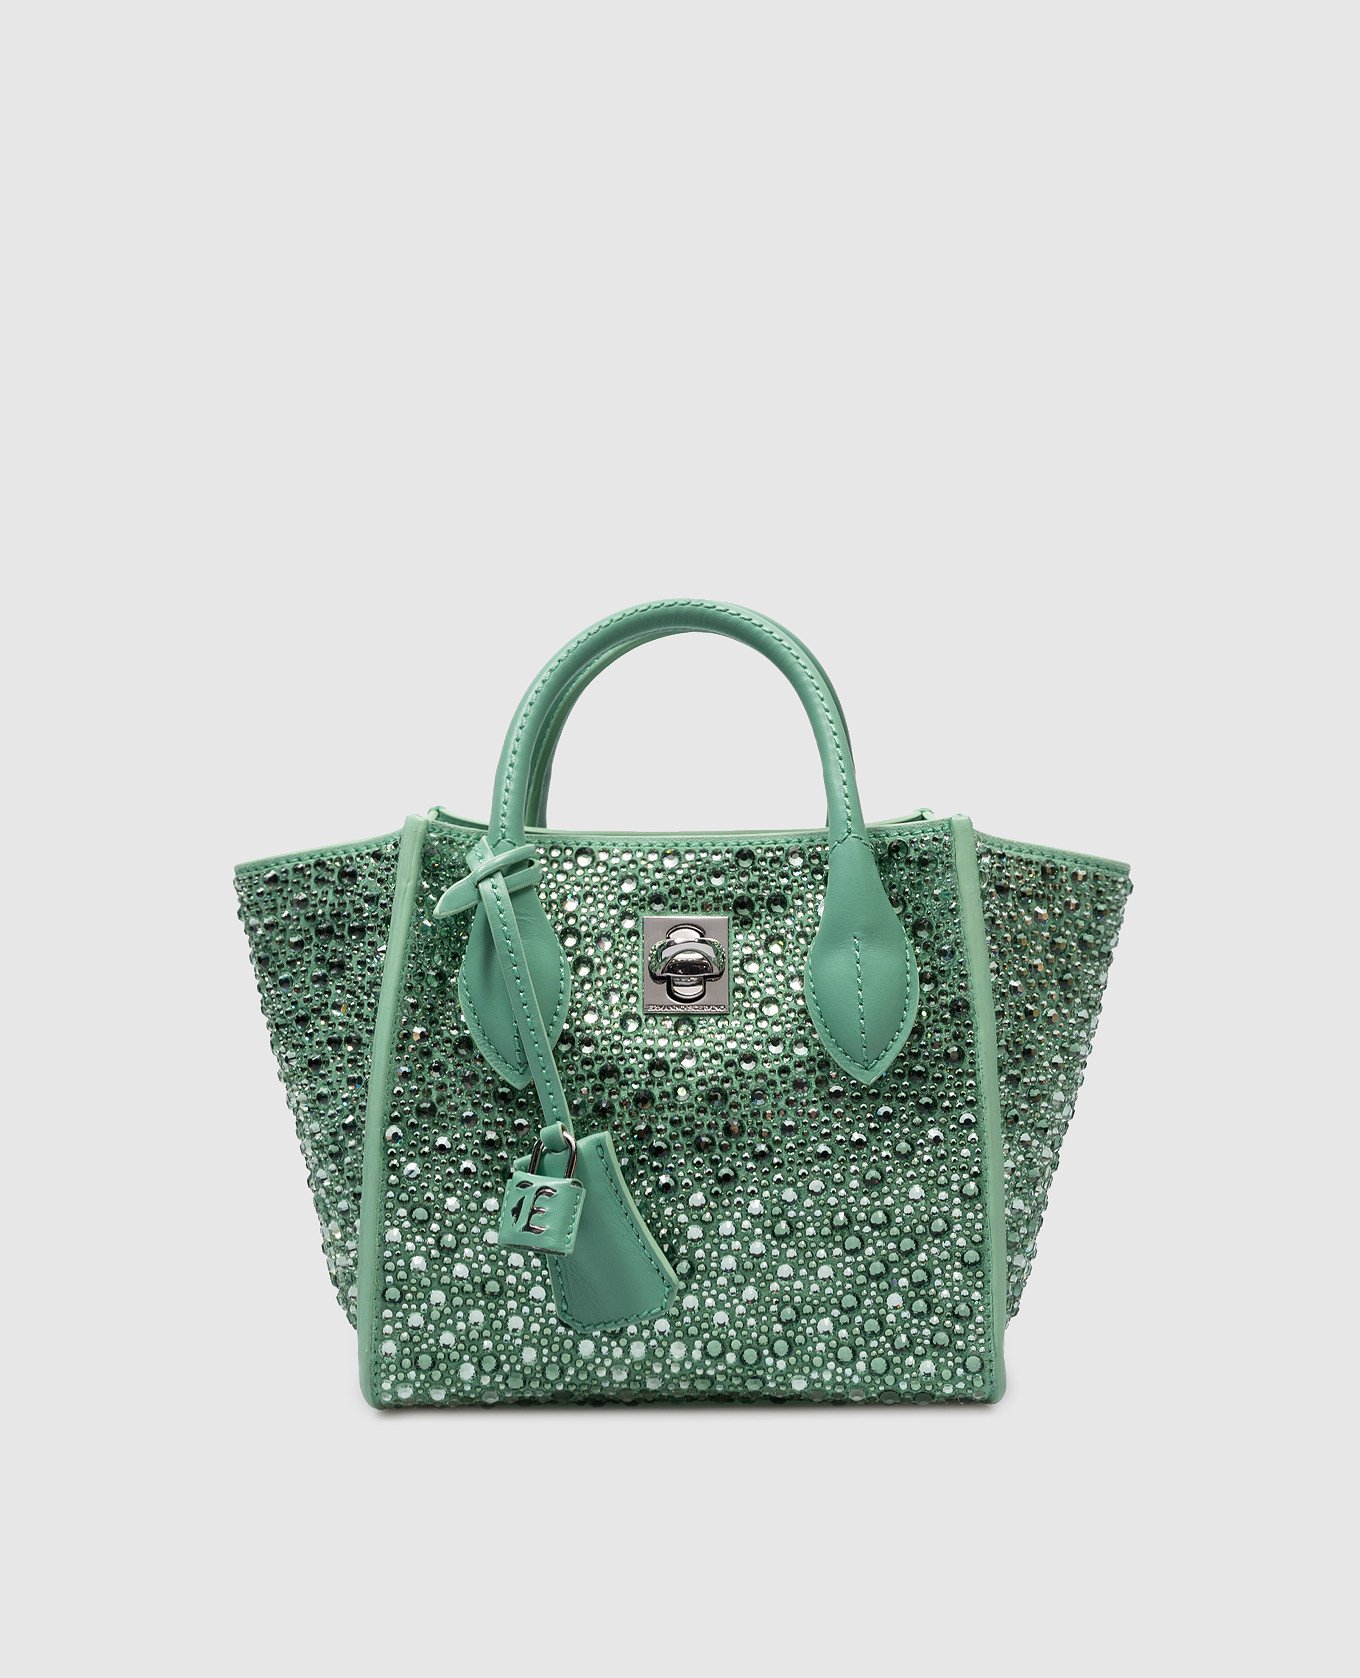 Maggie green suede bag with crystals